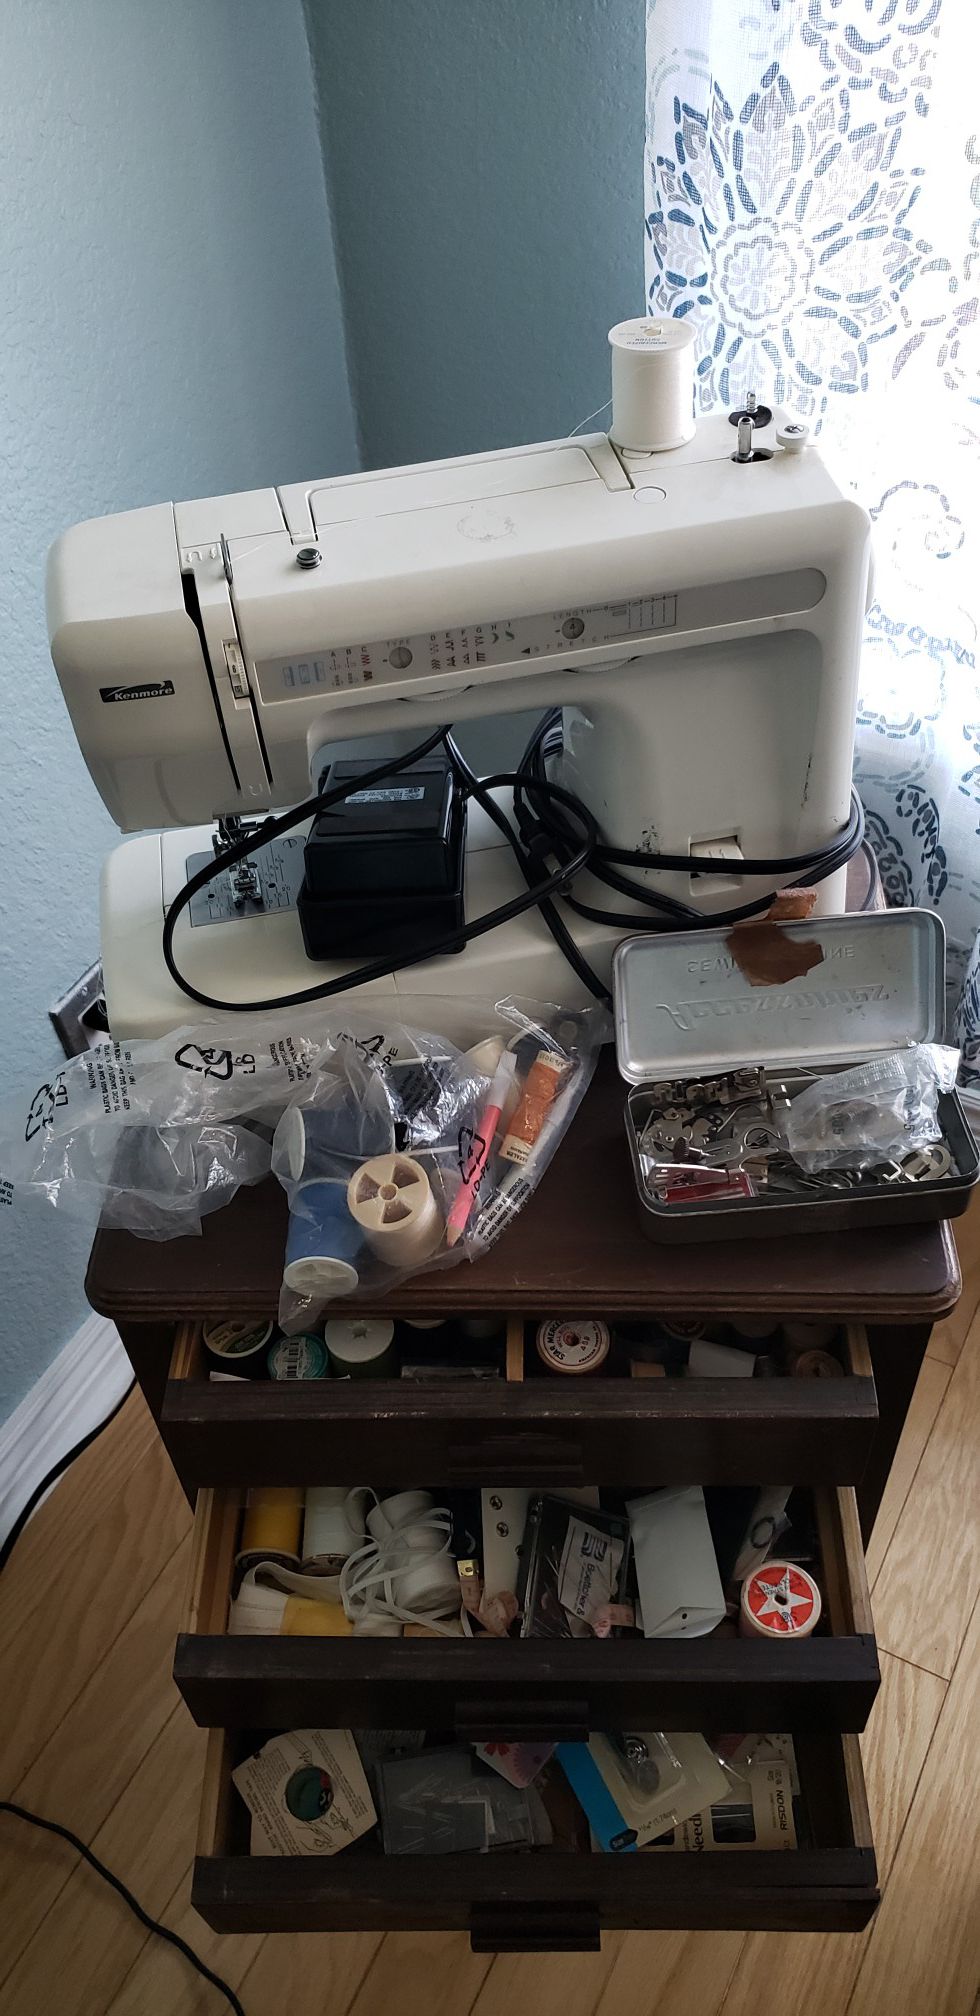 Sewing machine with a lot sewing tools